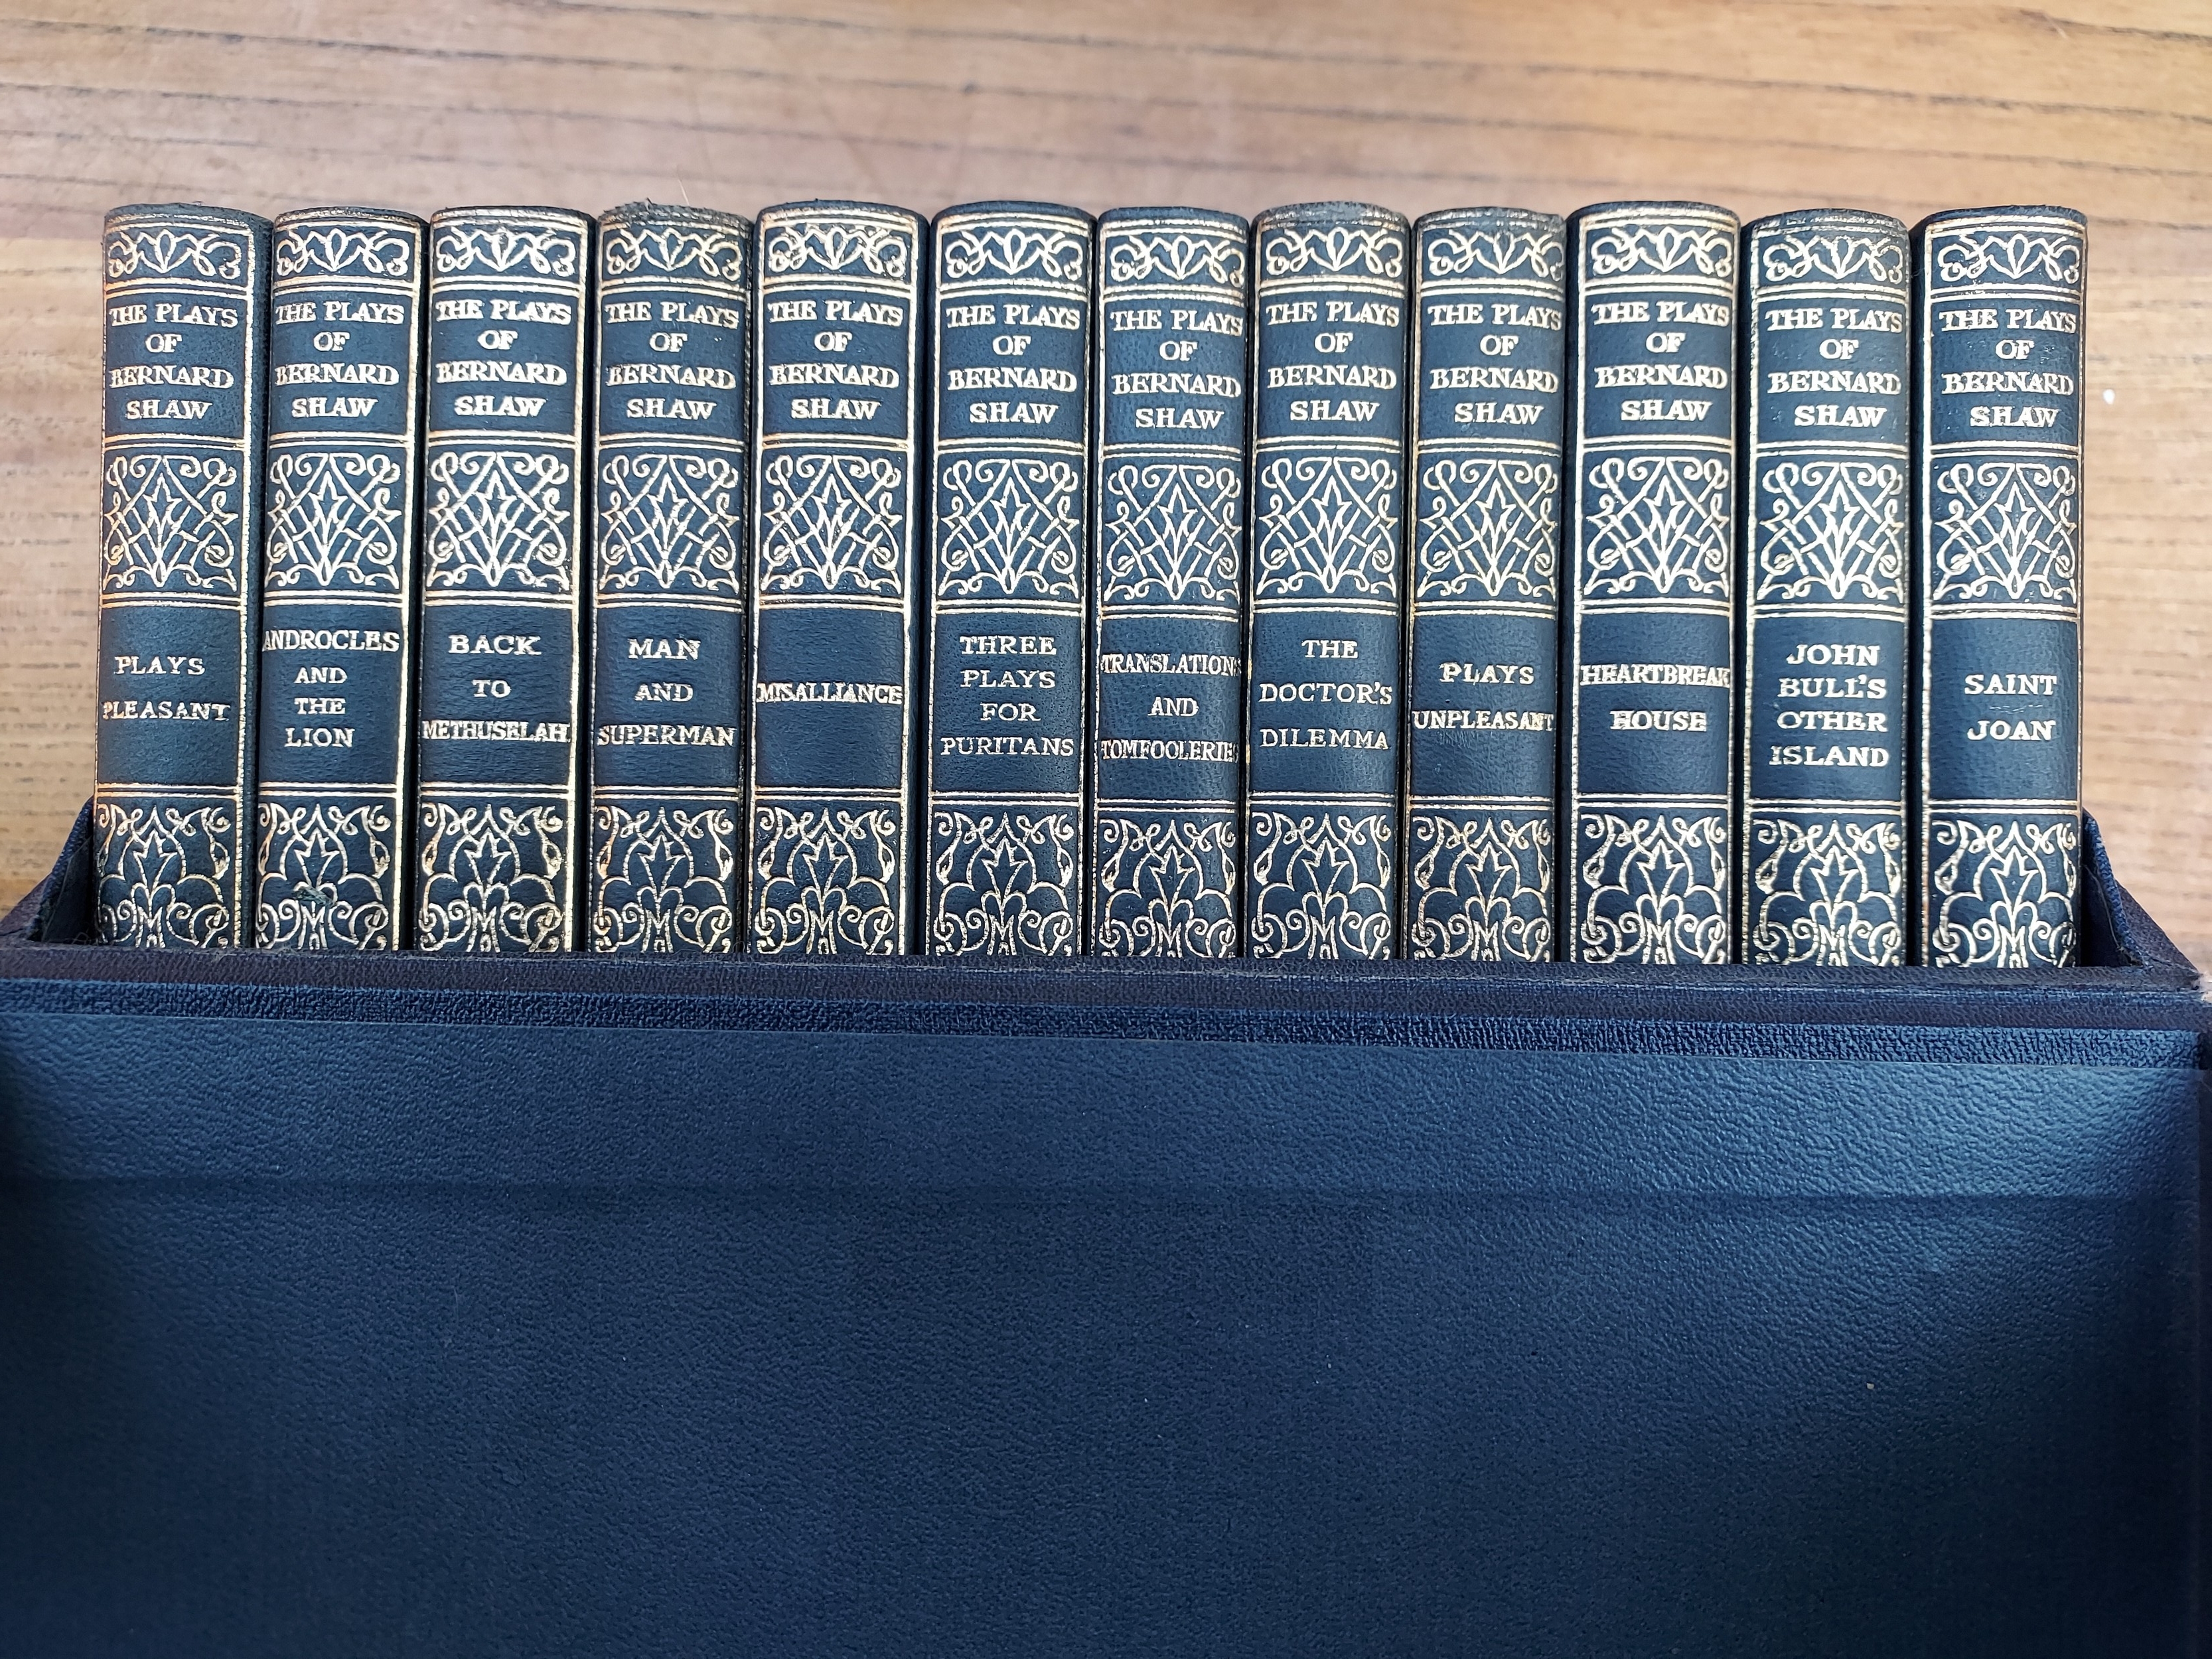 12 Pocket Collators Plays By George Bernard Shaw in Presentation Box In Very Good Condition. The